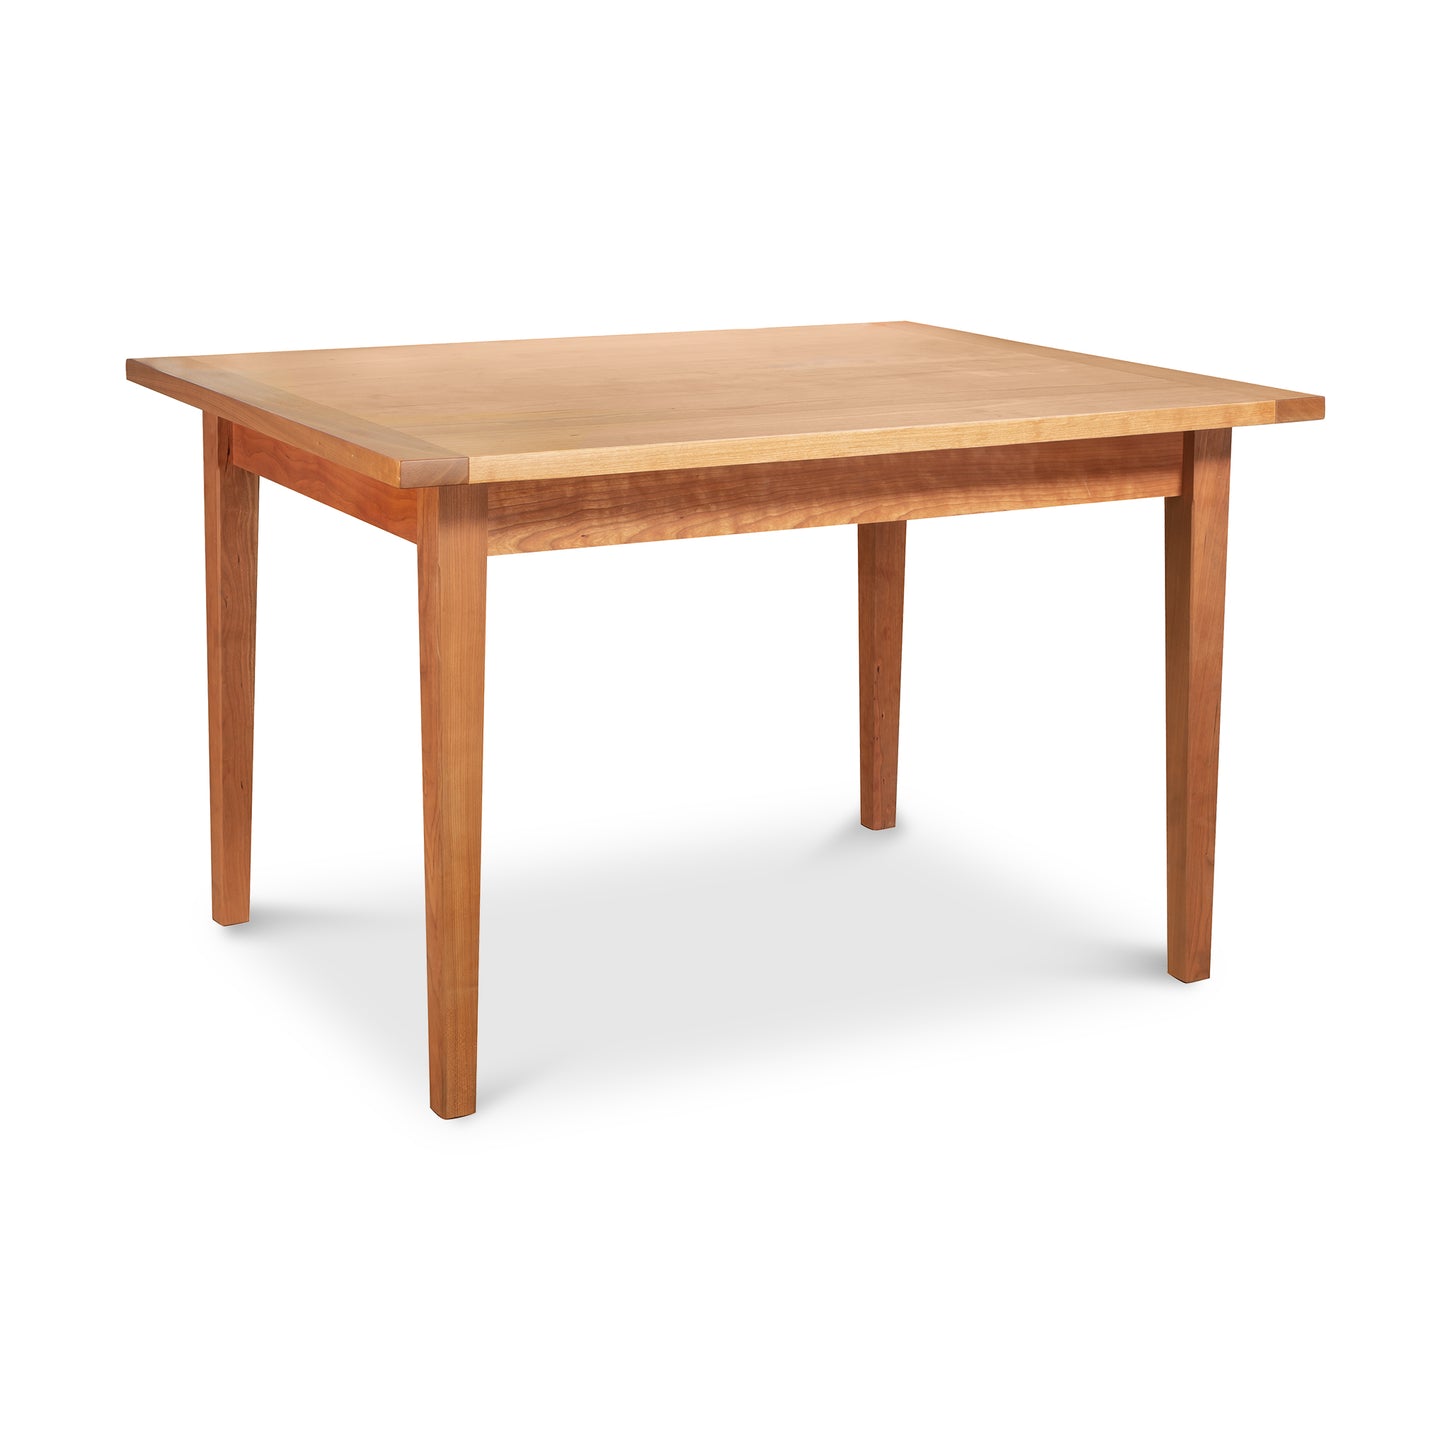 A Vermont Shaker Solid Top Harvest Table by Maple Corner Woodworks with a light brown finish, featuring a solid top and four straight legs, isolated on a white background.